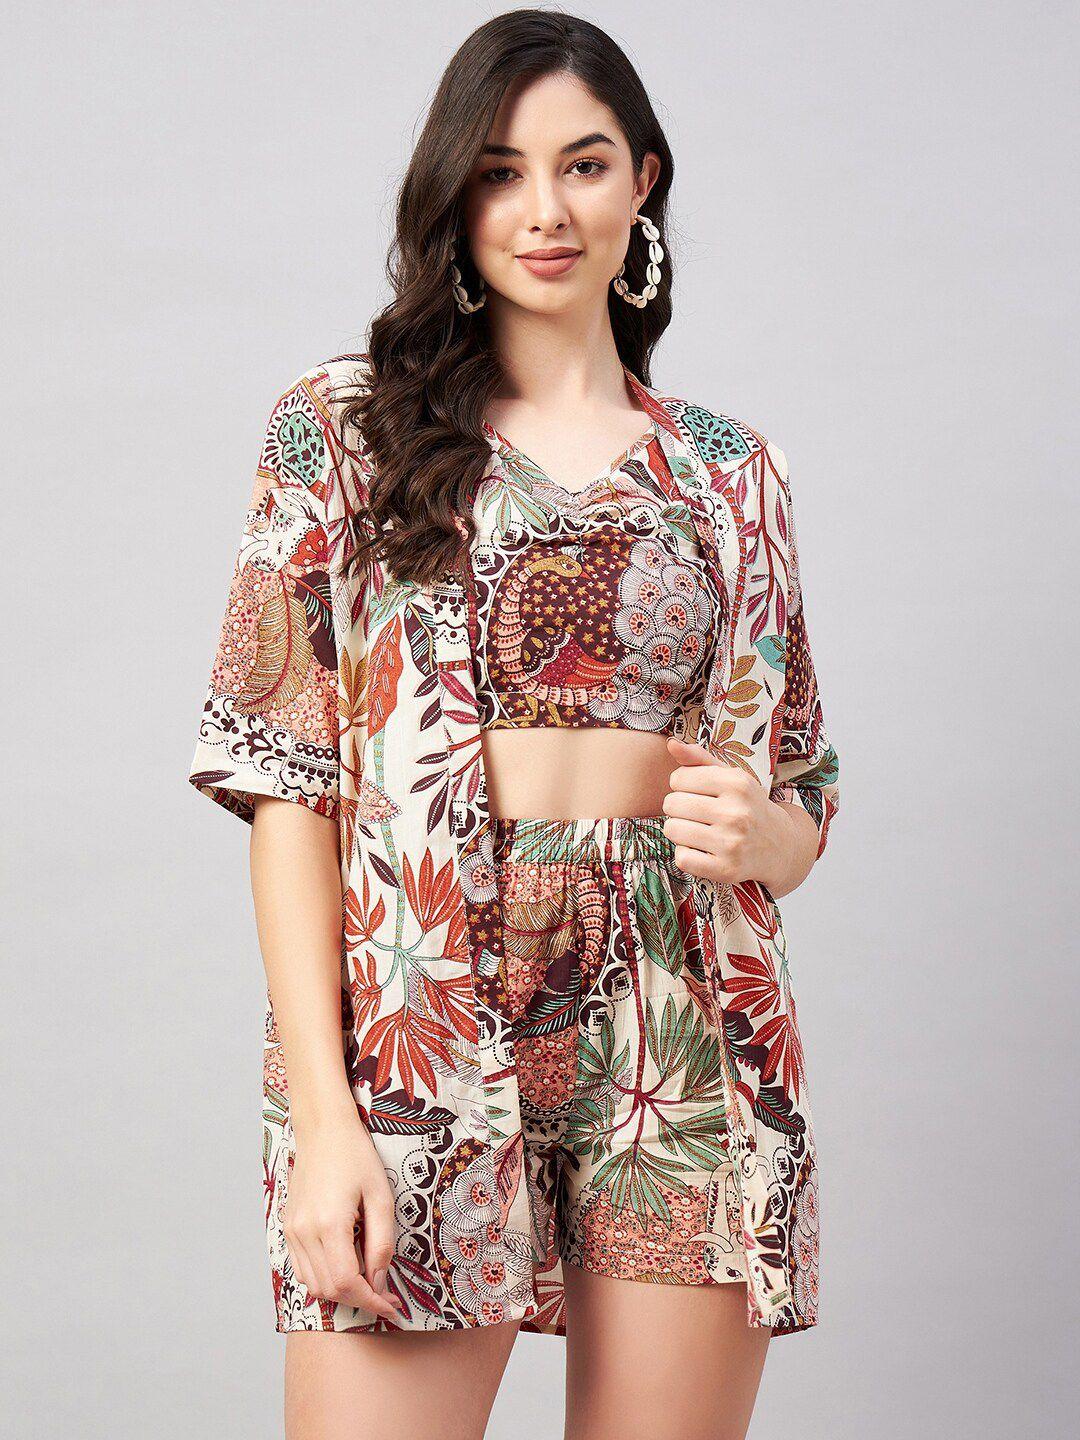 winered printed pure cotton top with shorts & shirt co-ords